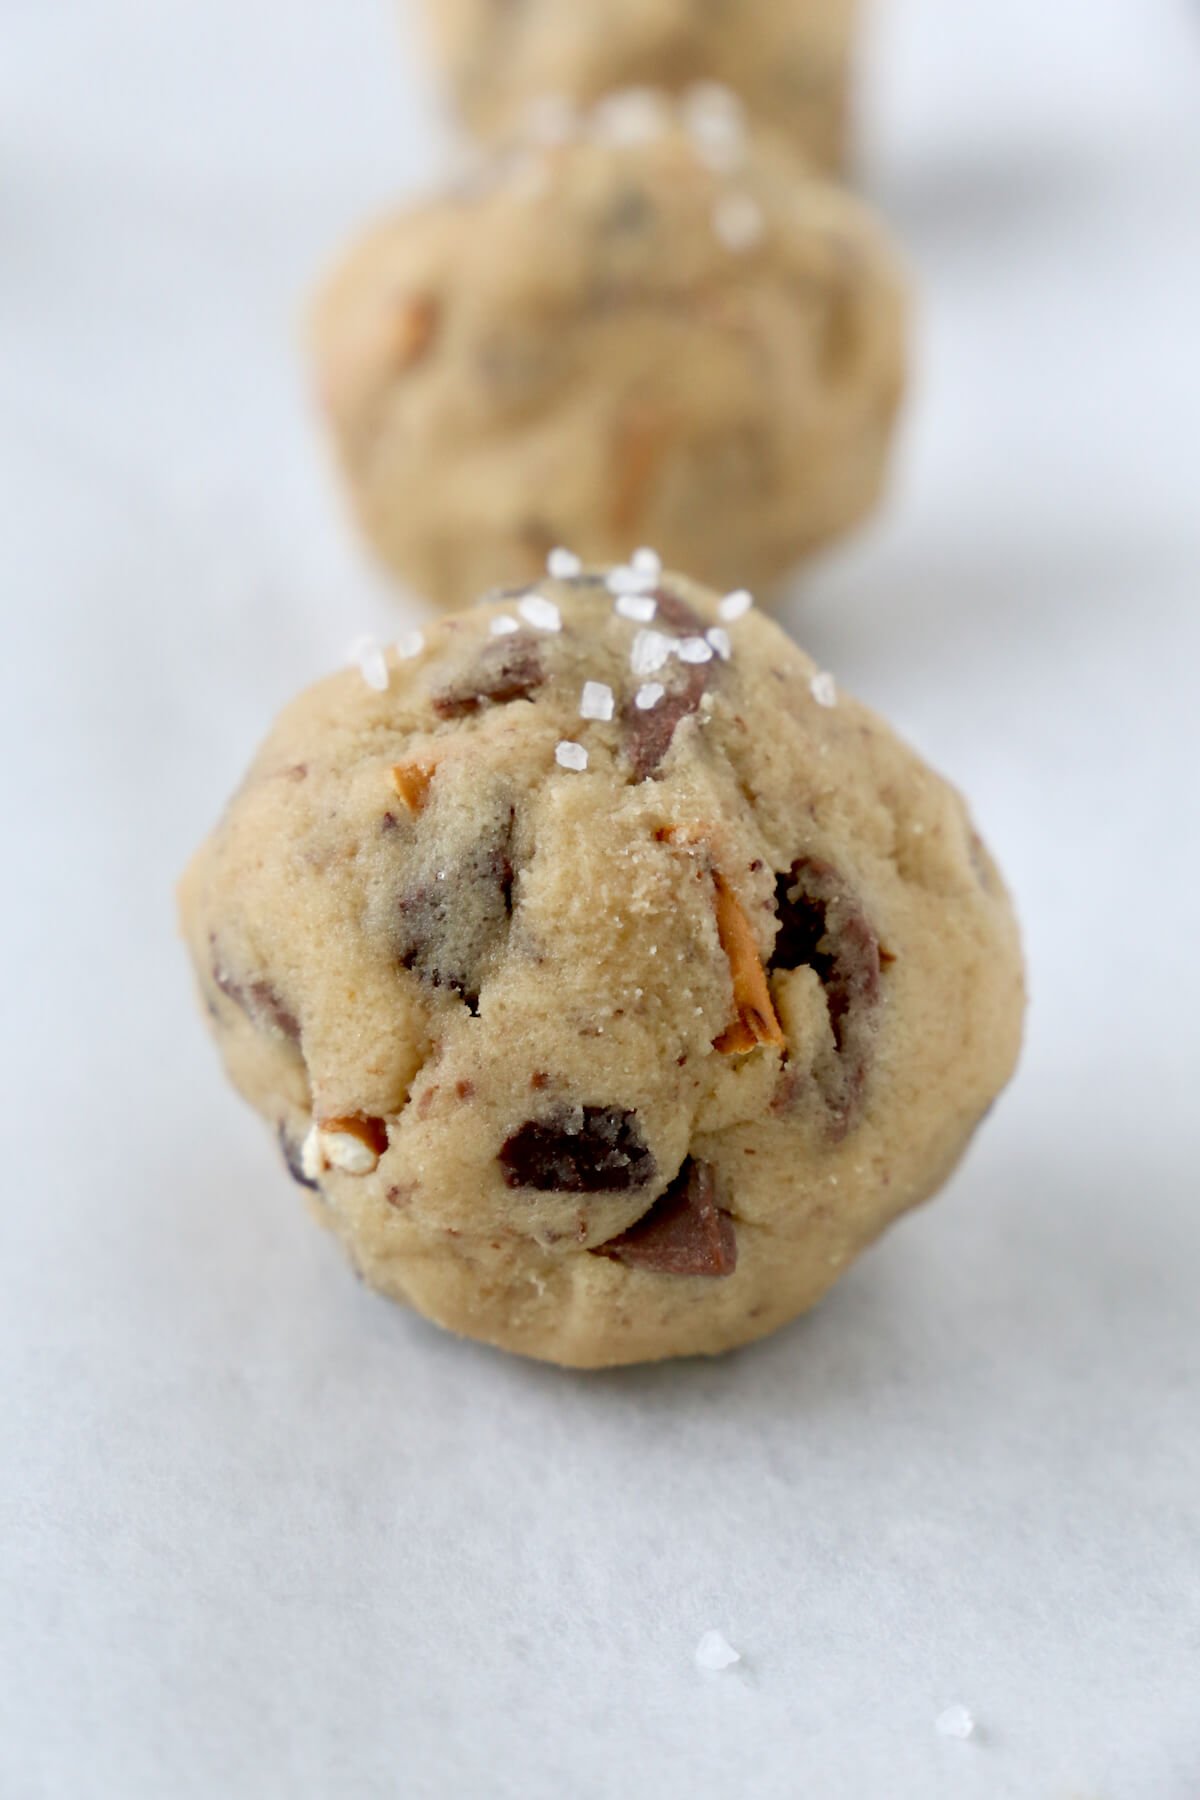 A large round ball of cookie dough with sea salt sprinkled on top.  